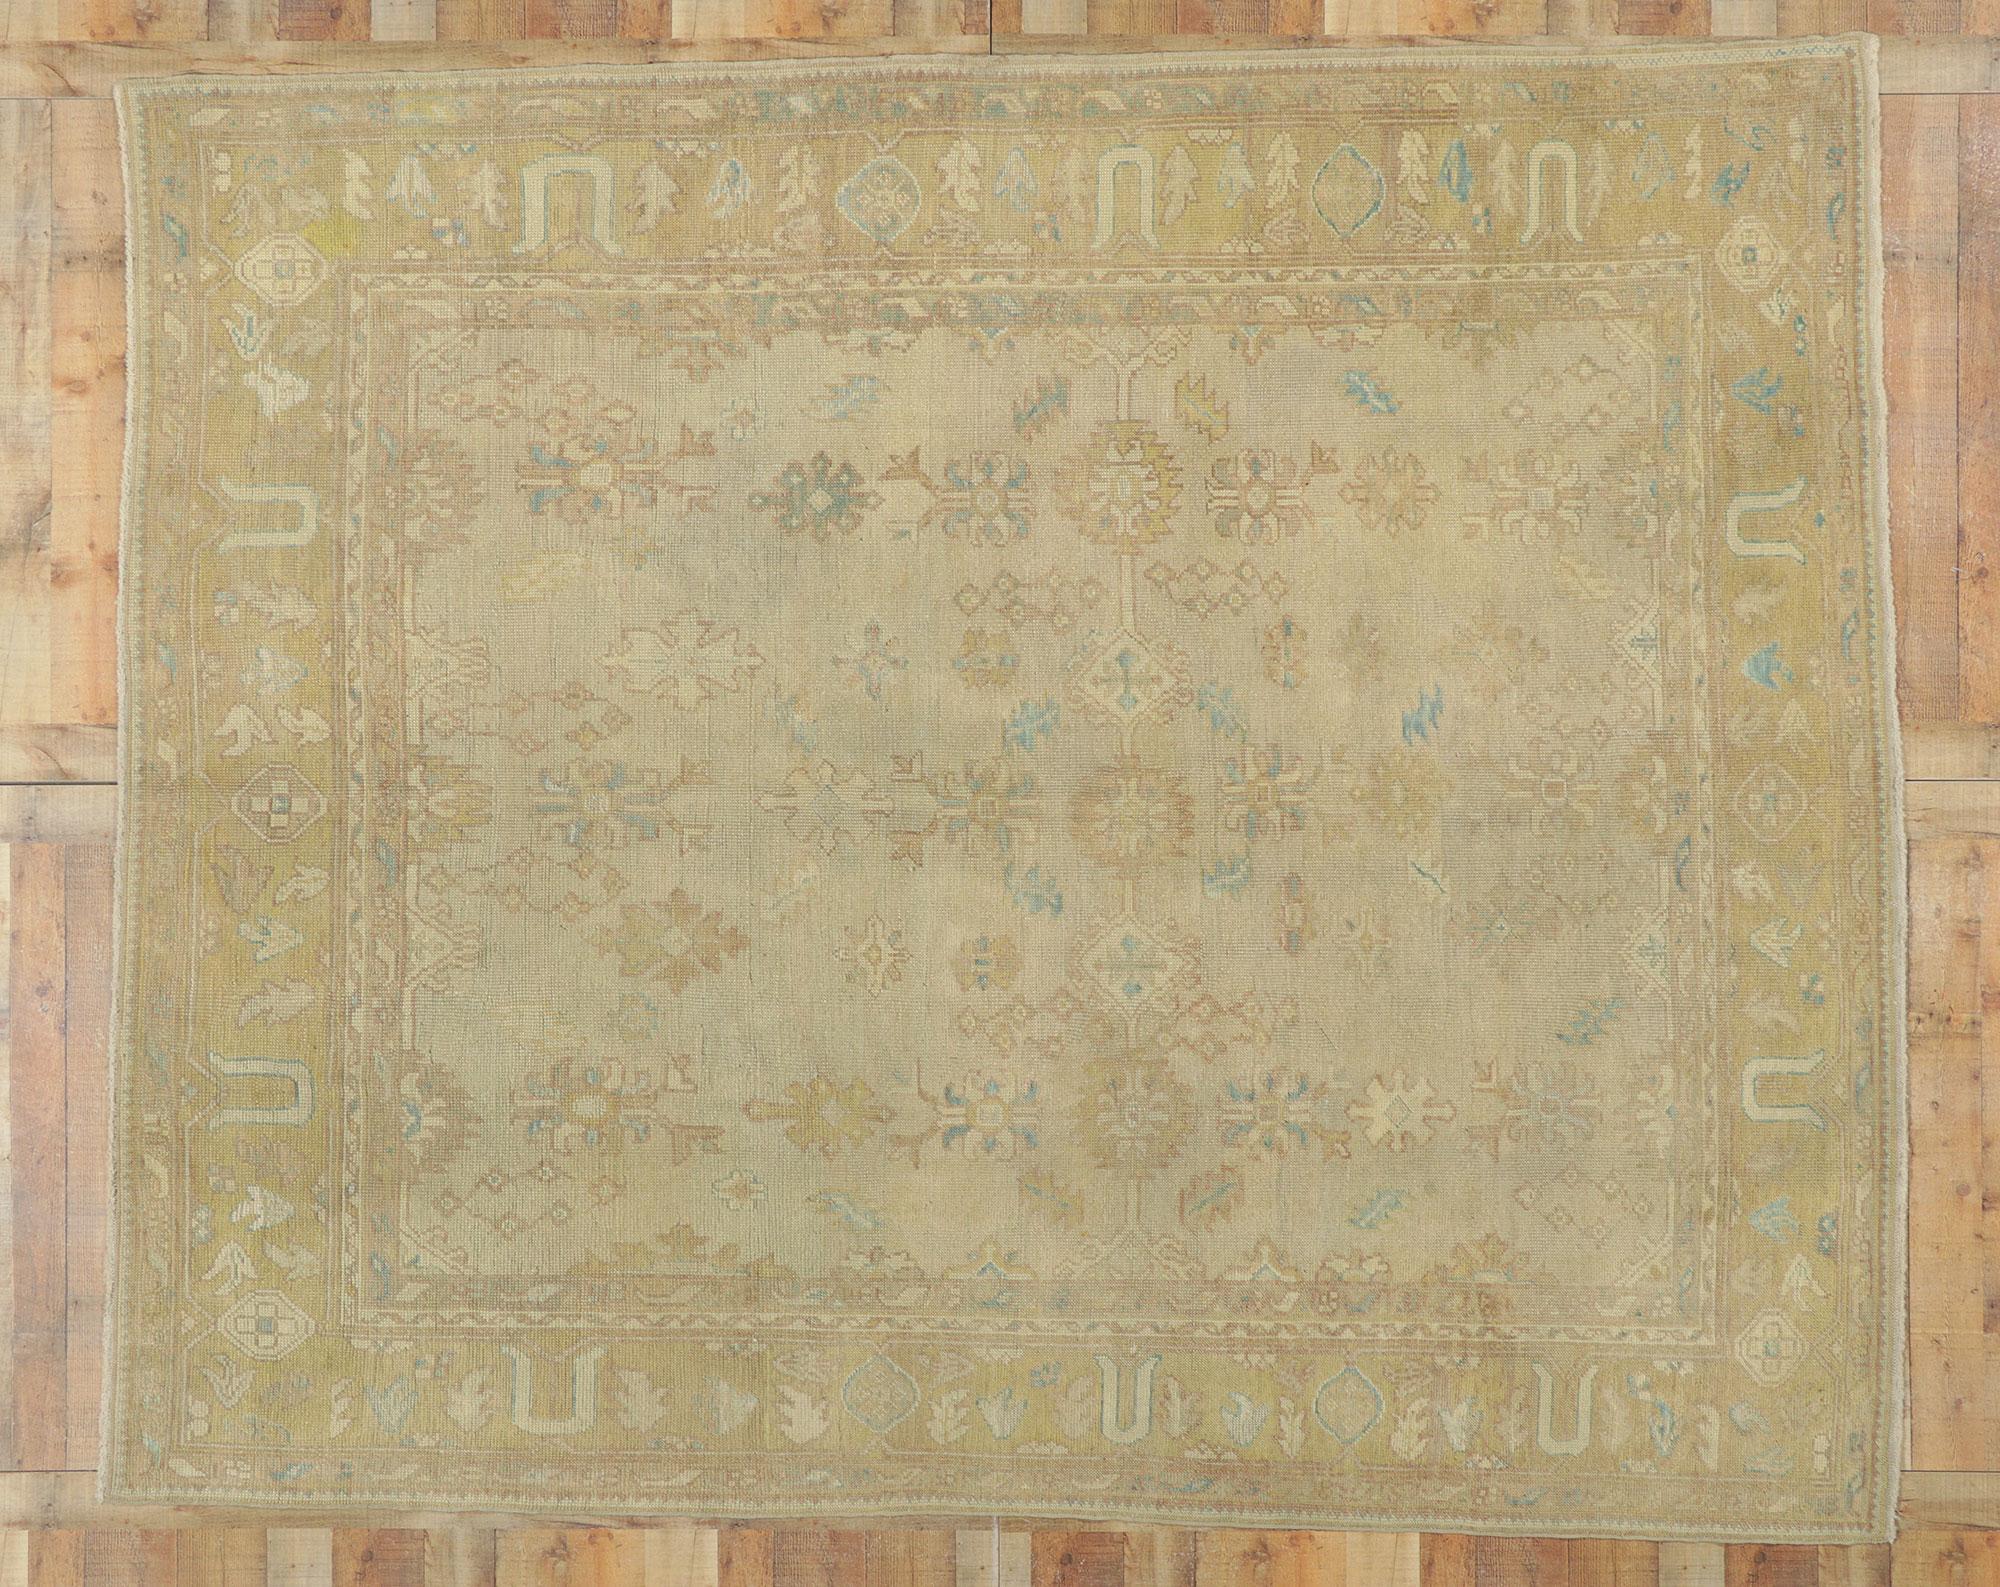 New Vintage-Style Turkish Oushak Rug with Soft Earth-Tone Colors For Sale 1